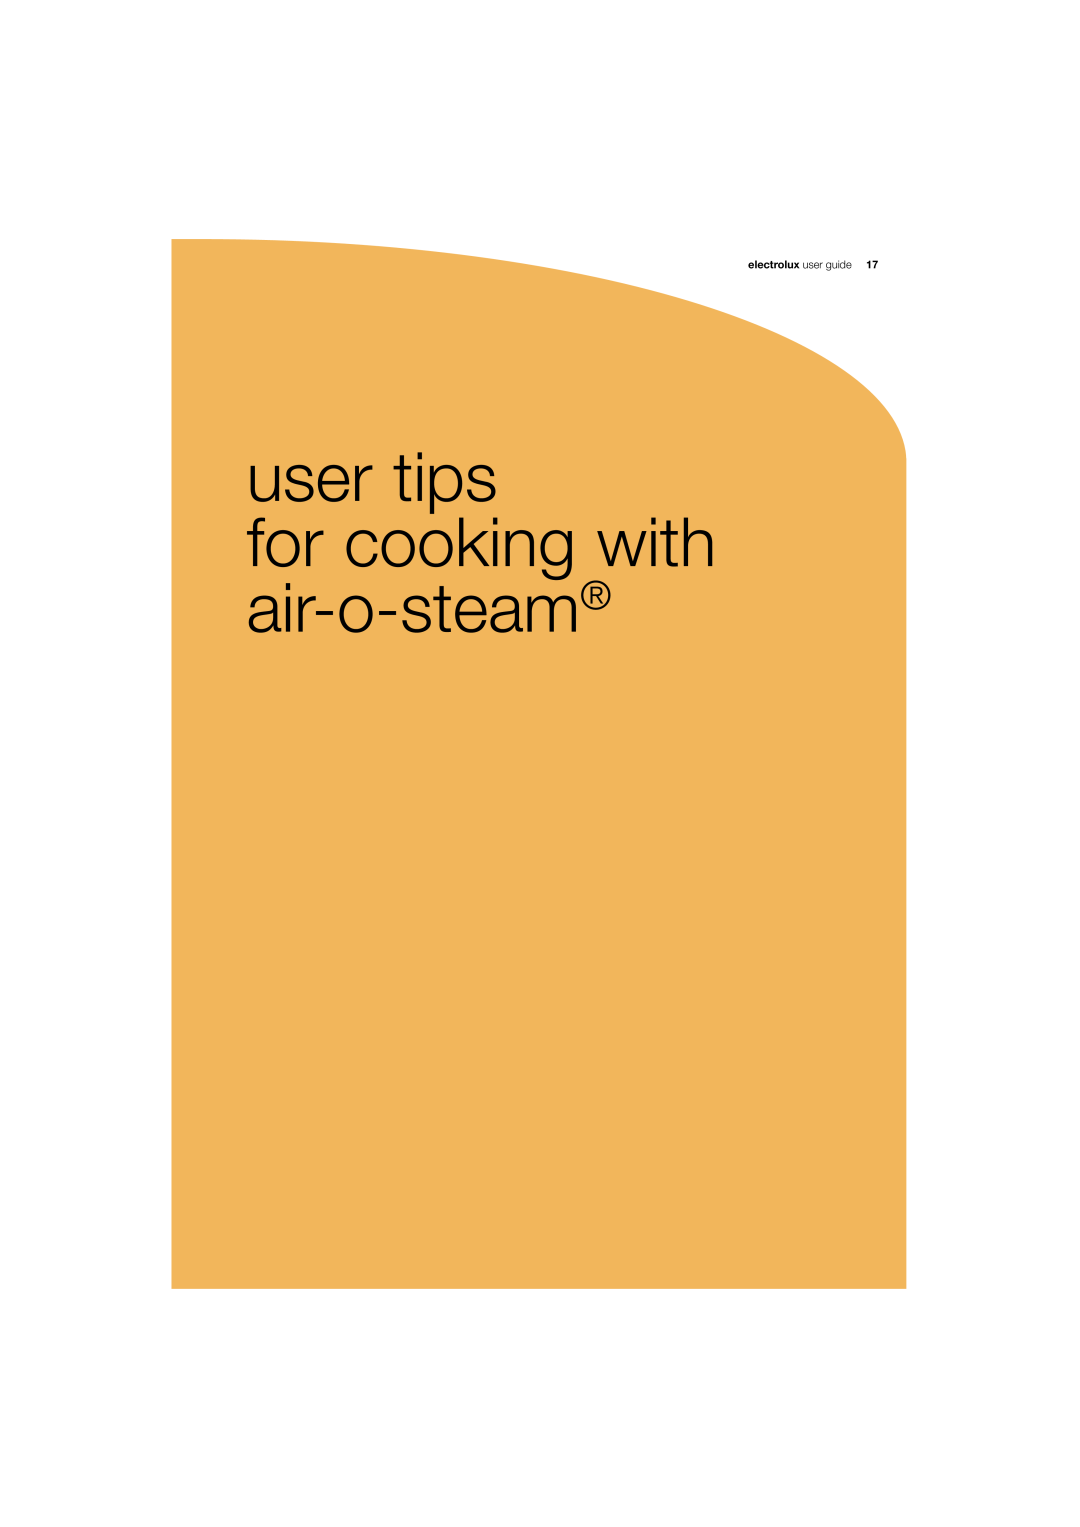 Electrolux 180 manual user tips for cooking with air-o-steam, electrolux user guide 